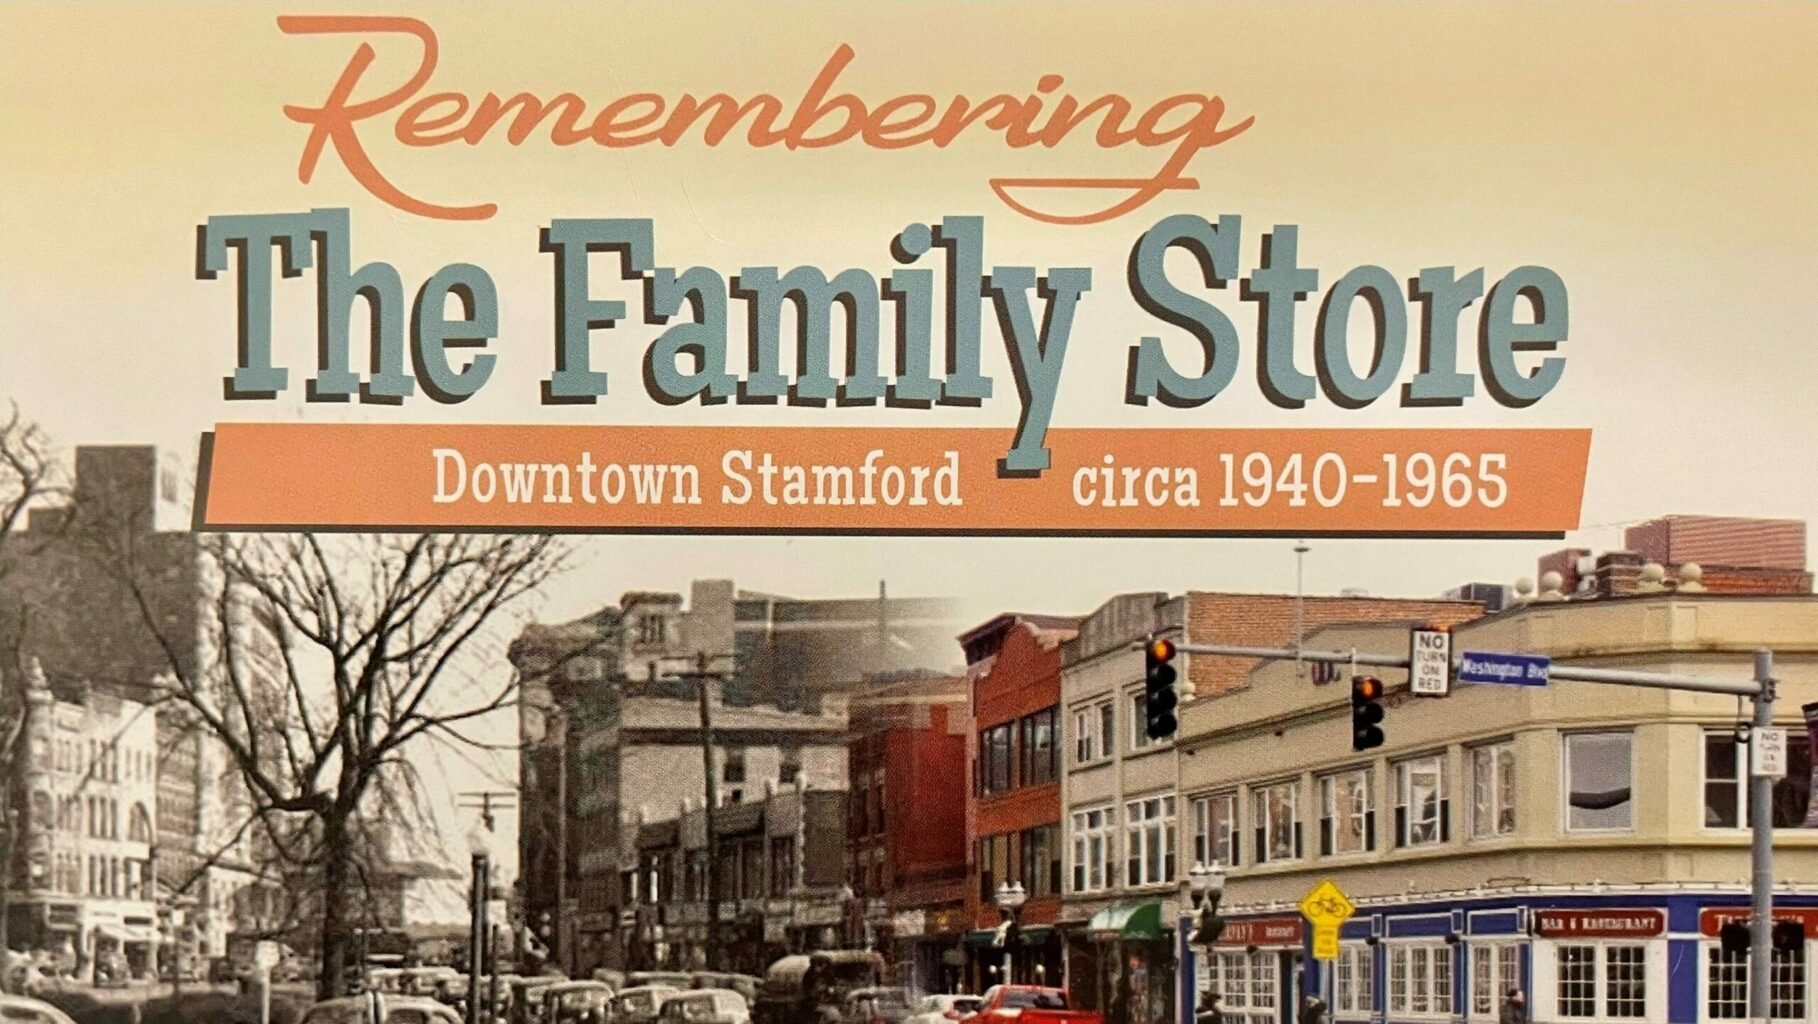 Remembering-the-family-store-scaled-e1693921157601